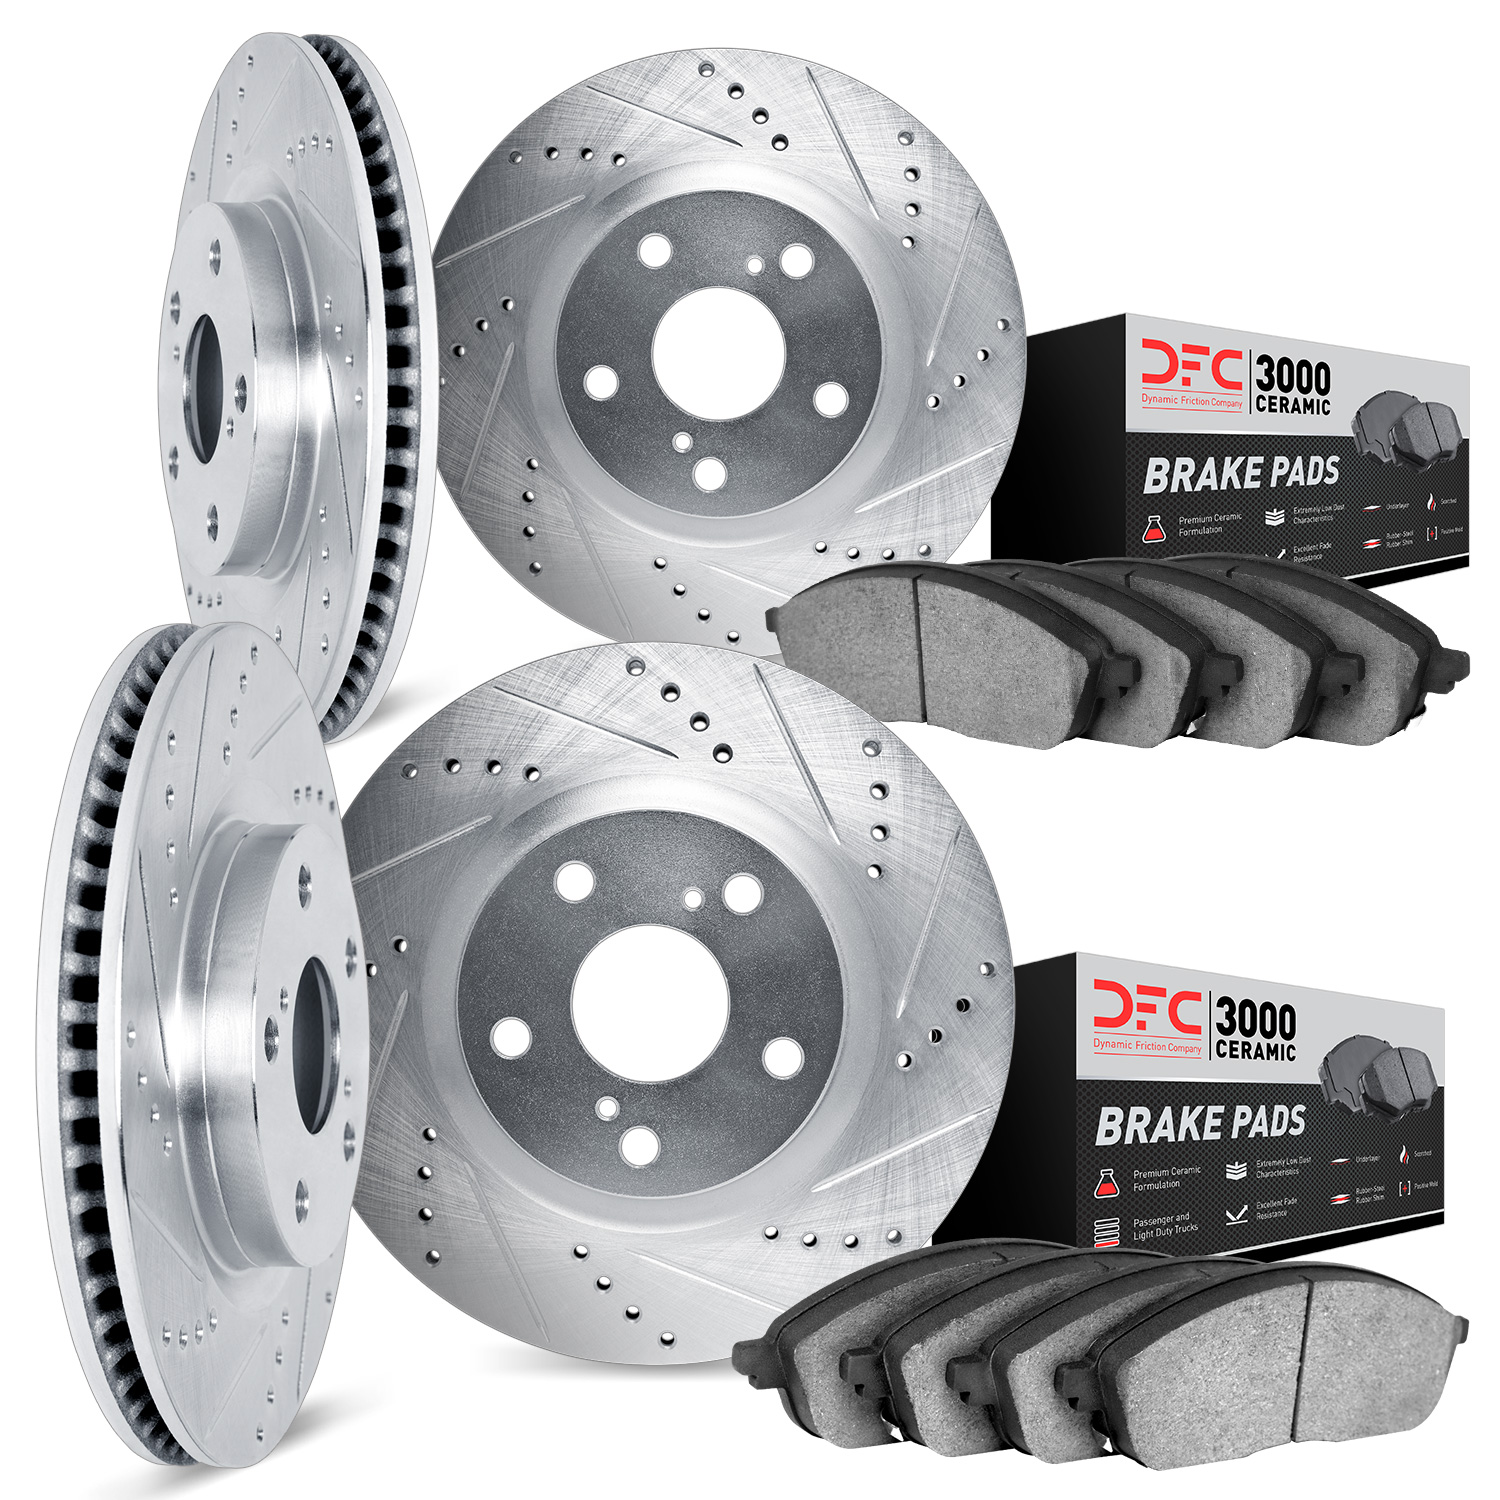 7304-20011 Drilled/Slotted Brake Rotor with 3000-Series Ceramic Brake Pads Kit [Silver], 2006-2010 Jaguar, Position: Front and R